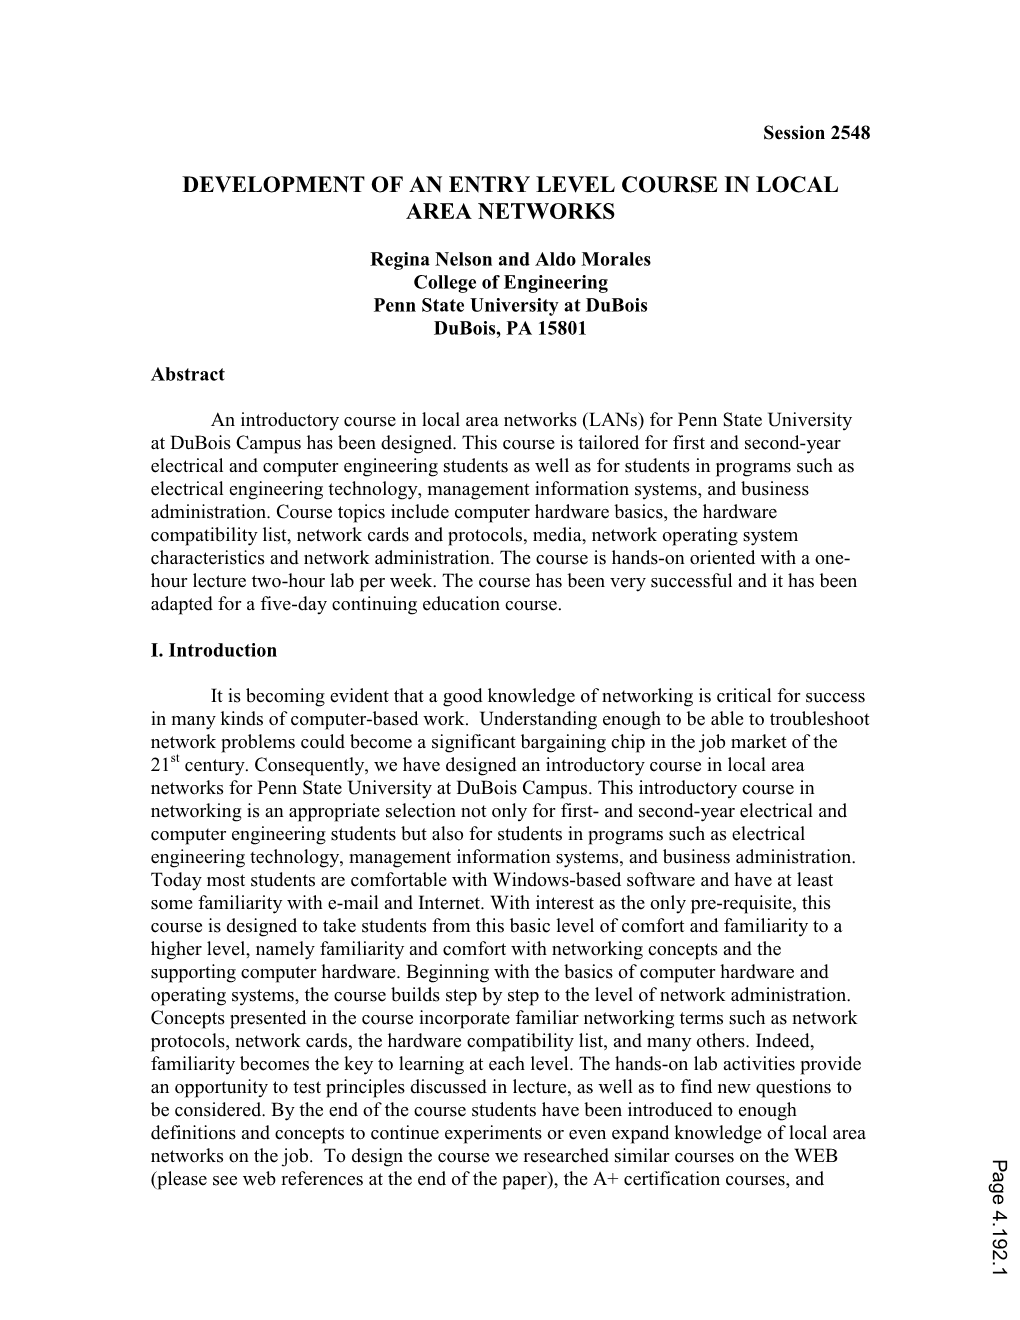 Development of an Entry Level Course in Local Area Networks